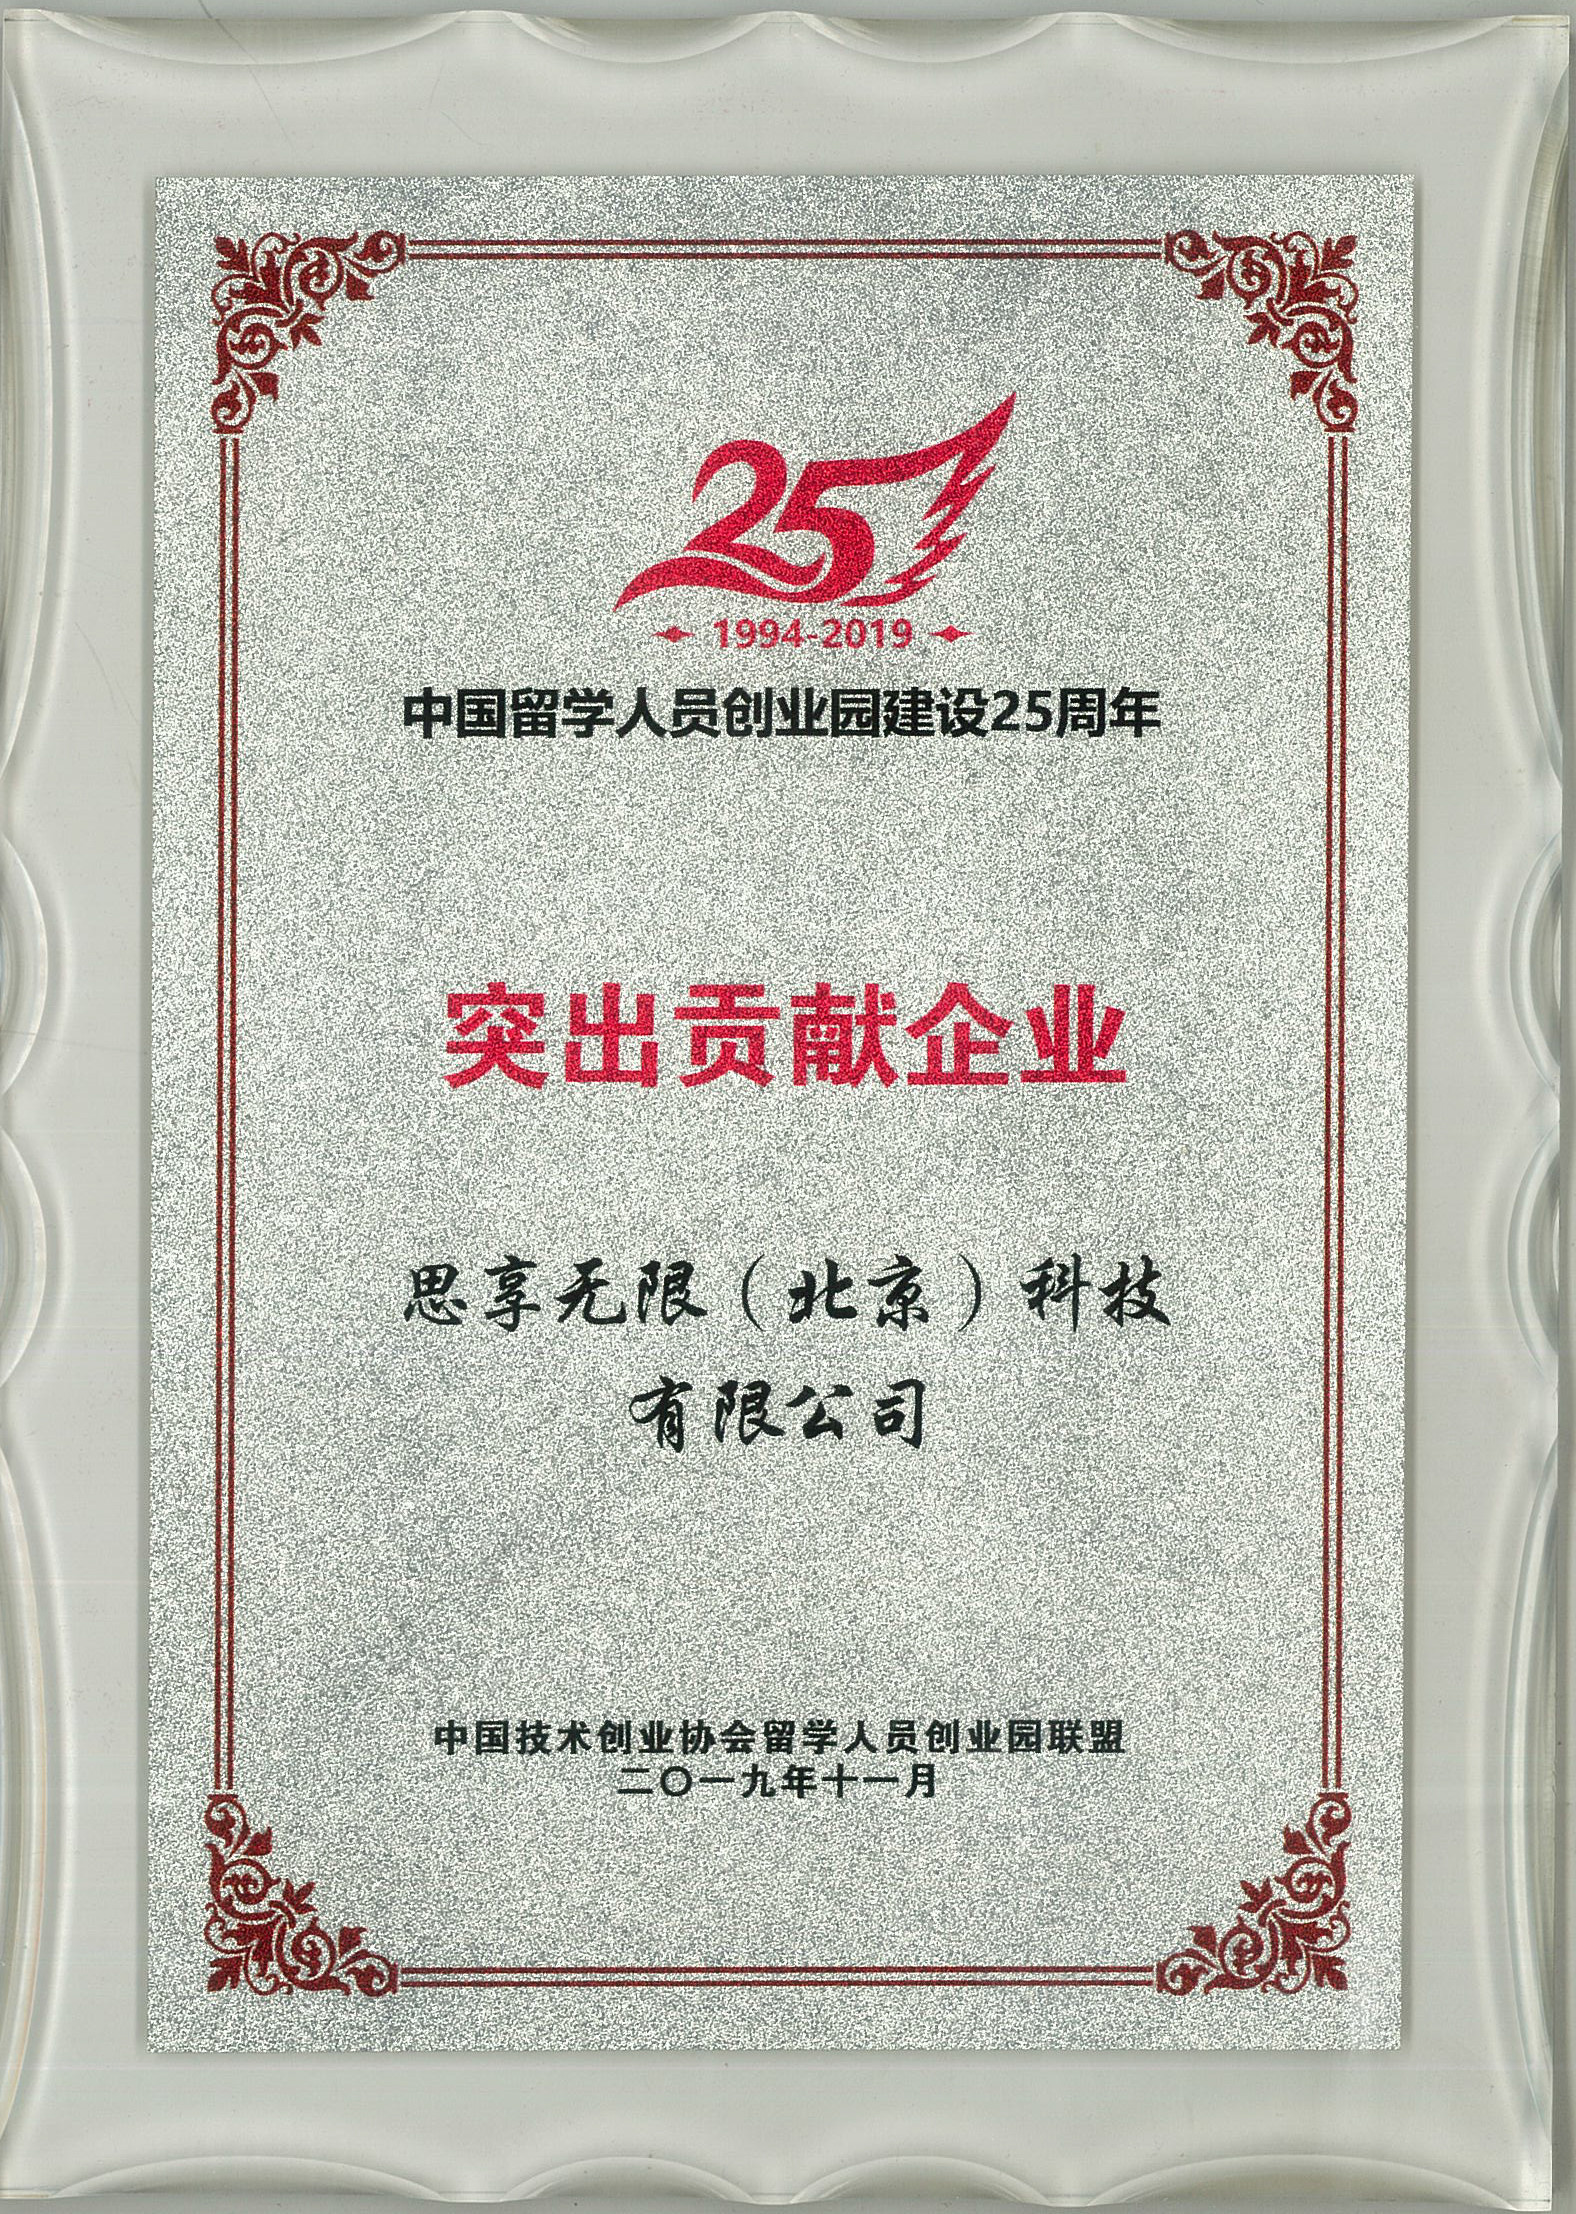                             "Enterprise with Outstanding Contribution" in the 25th Anniversary of the Pioneer Park for Chinese Overseas Students
                        